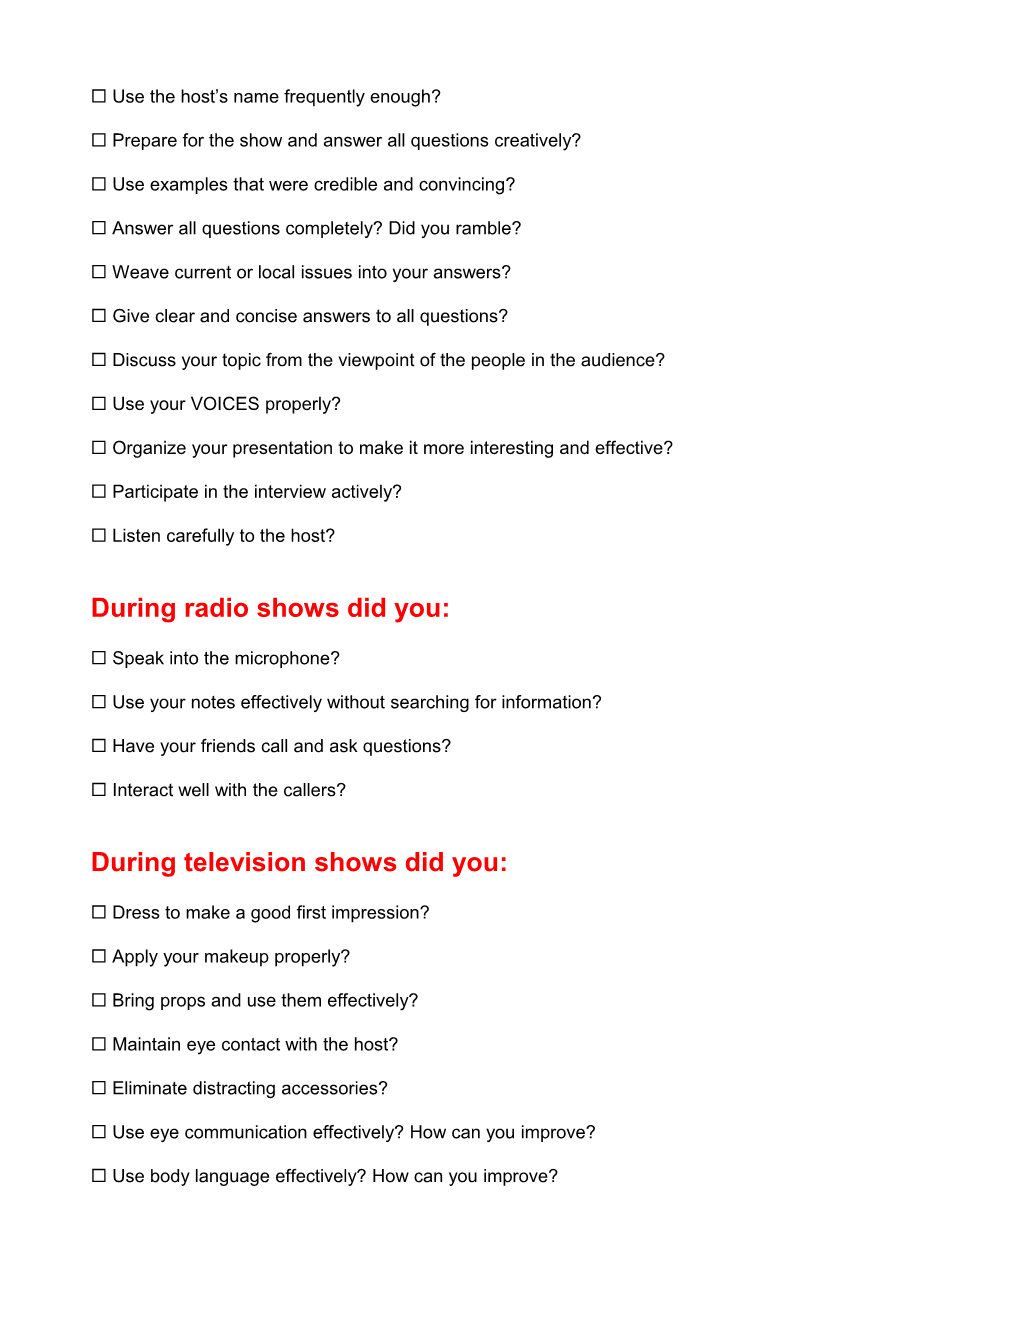 Checklist for Media Appearances